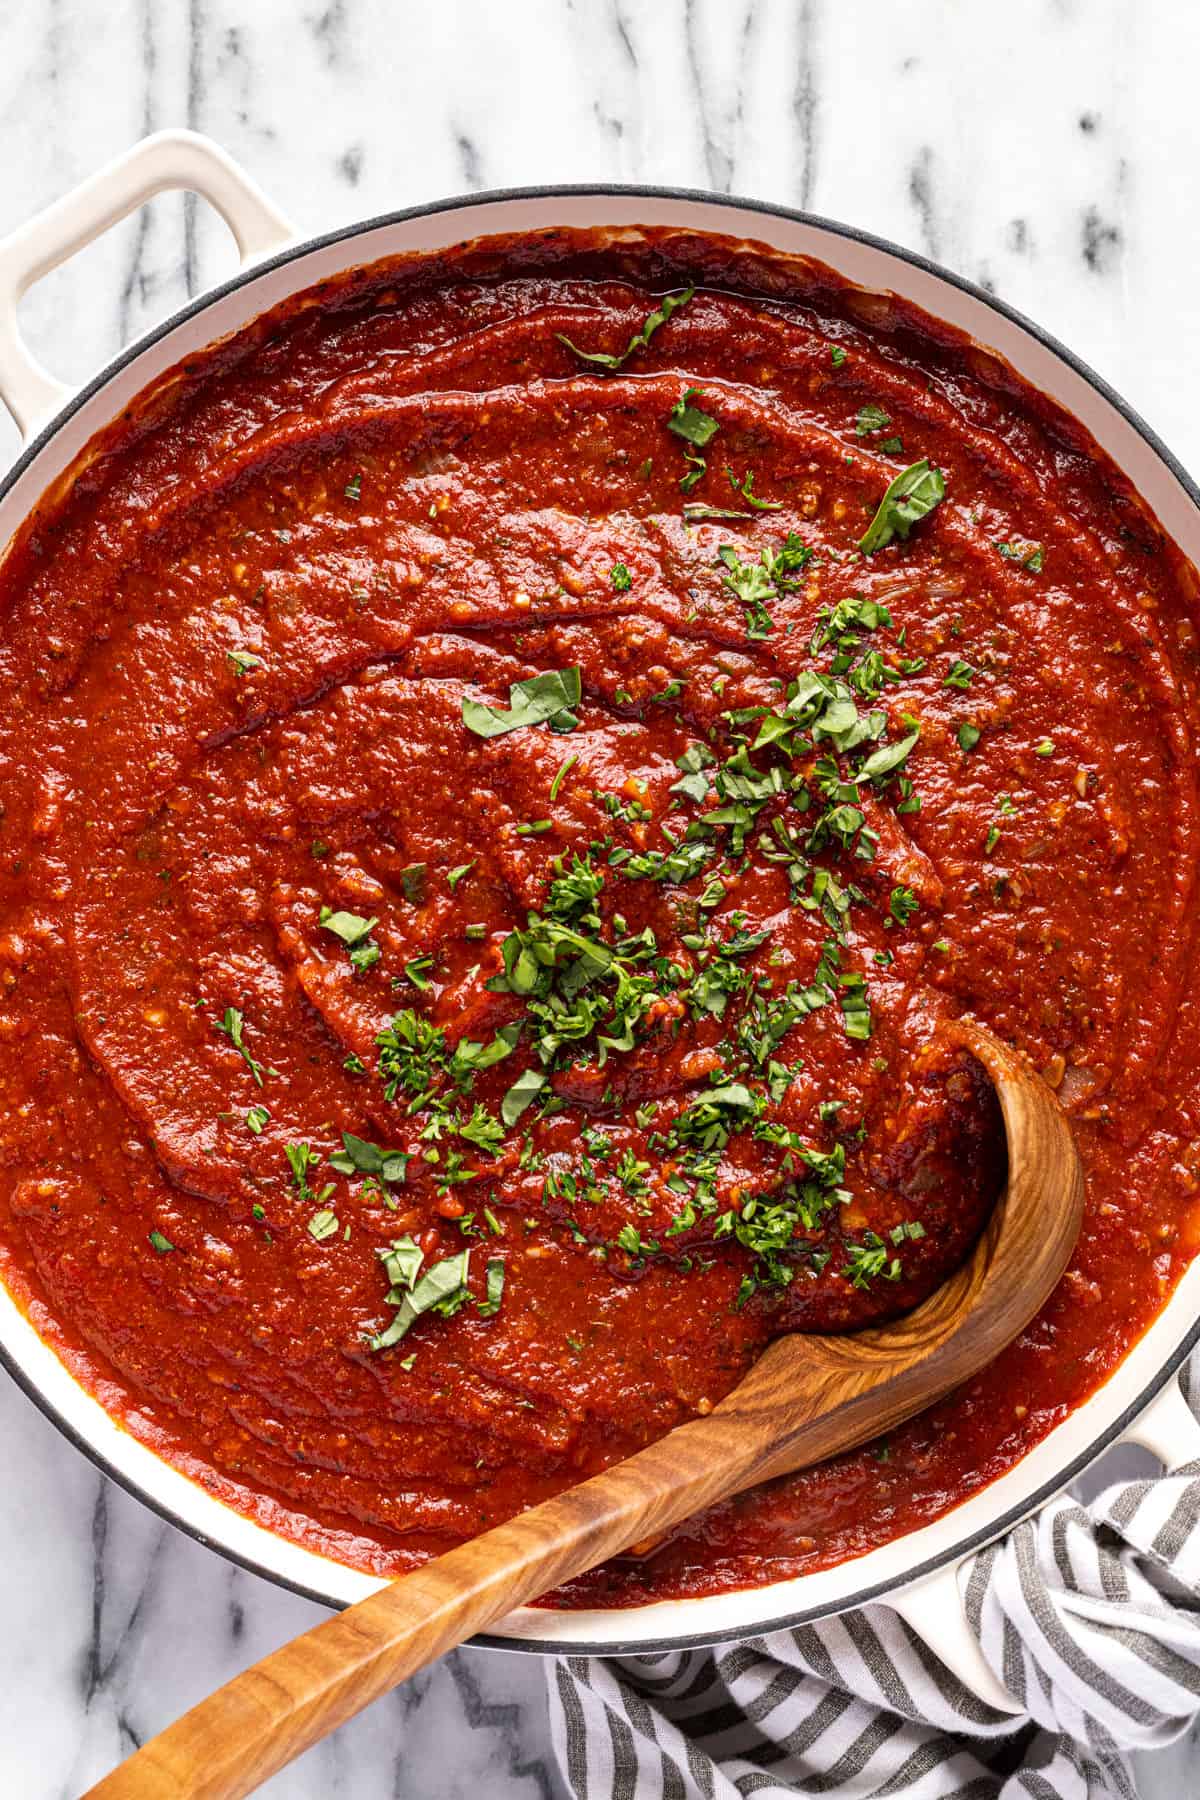 Large white pot filled with homemade meat sauce garnished with fresh herbs.